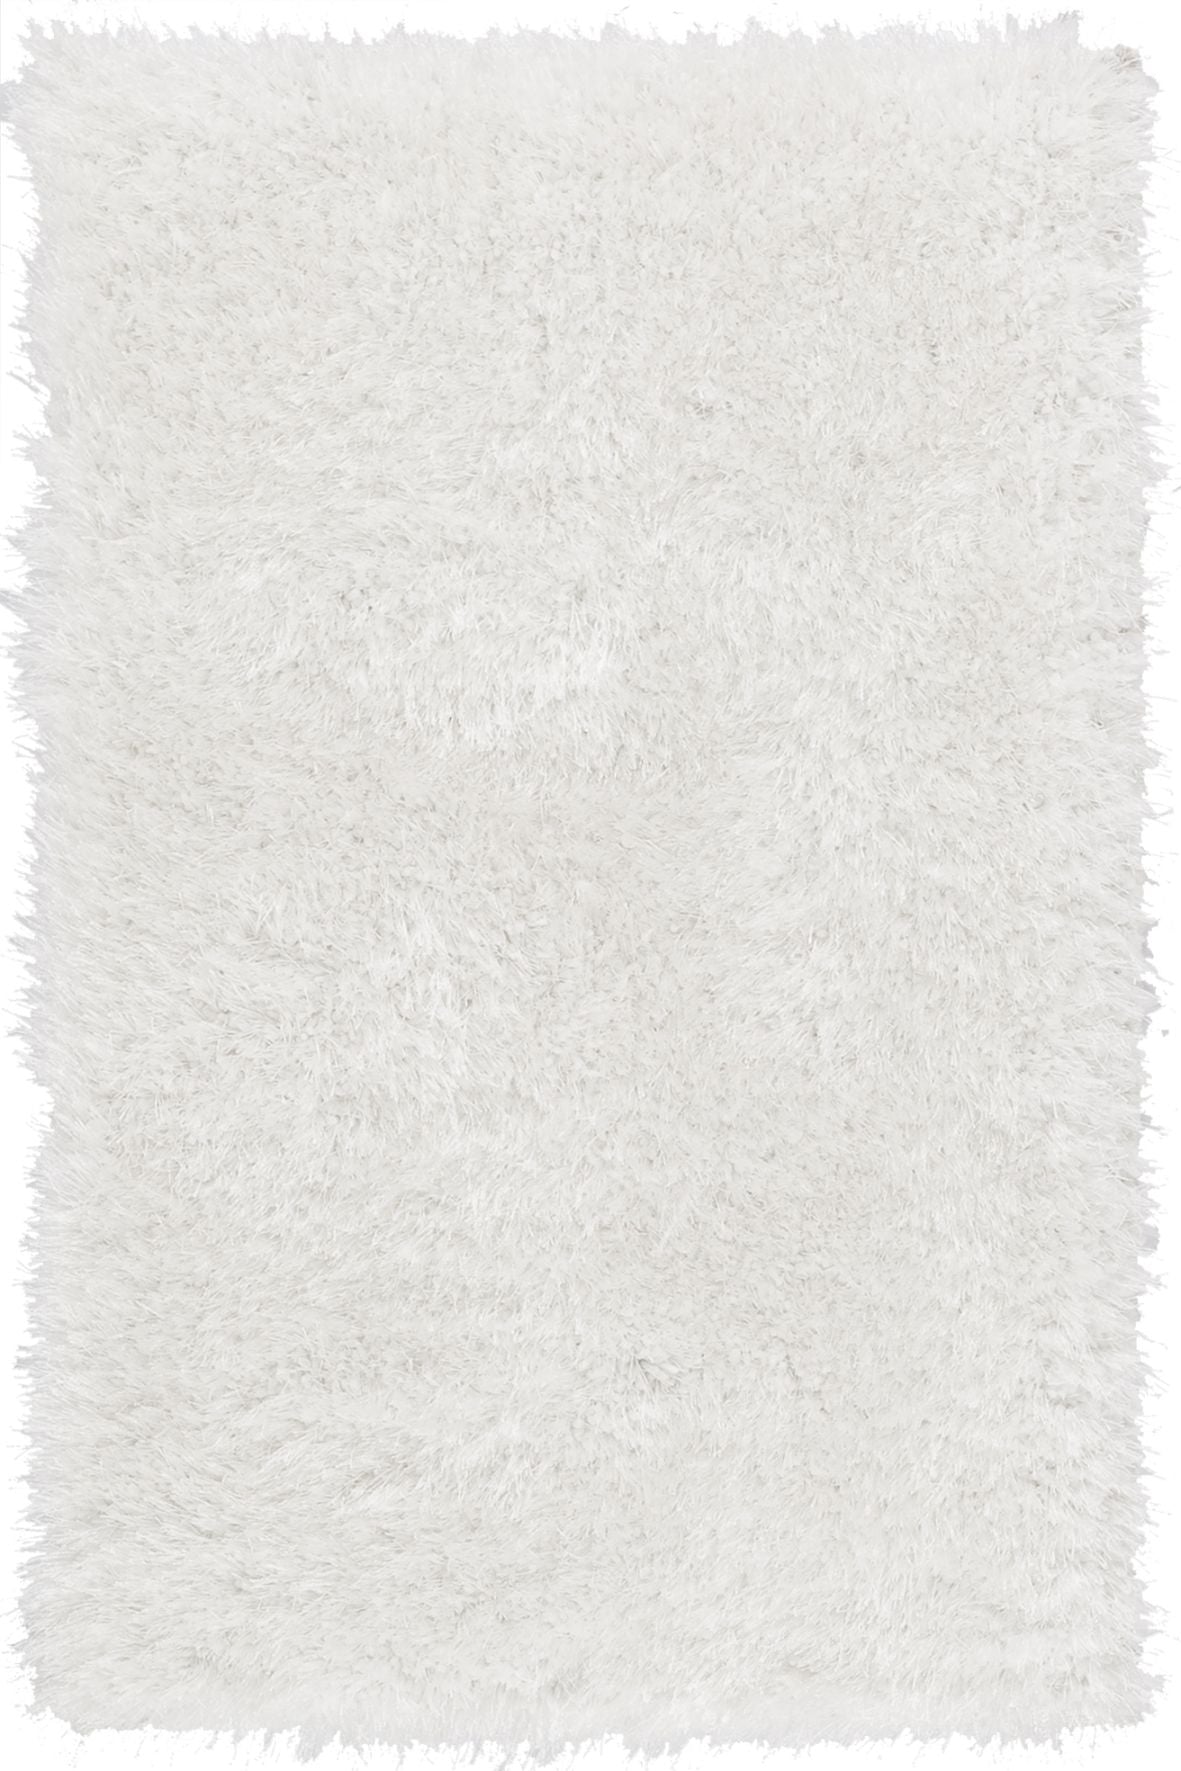 Shimmer Shag Snow White Solid Plain Modern Luster Ultra Thick Soft Plush Area Rug 2x3 20 X 31 Mat Contemporary Retro Polyester Textured Two Length 2 Pile Yarn Easy Clean Fade - imagessafavieh shag white contemporary round rug roblox